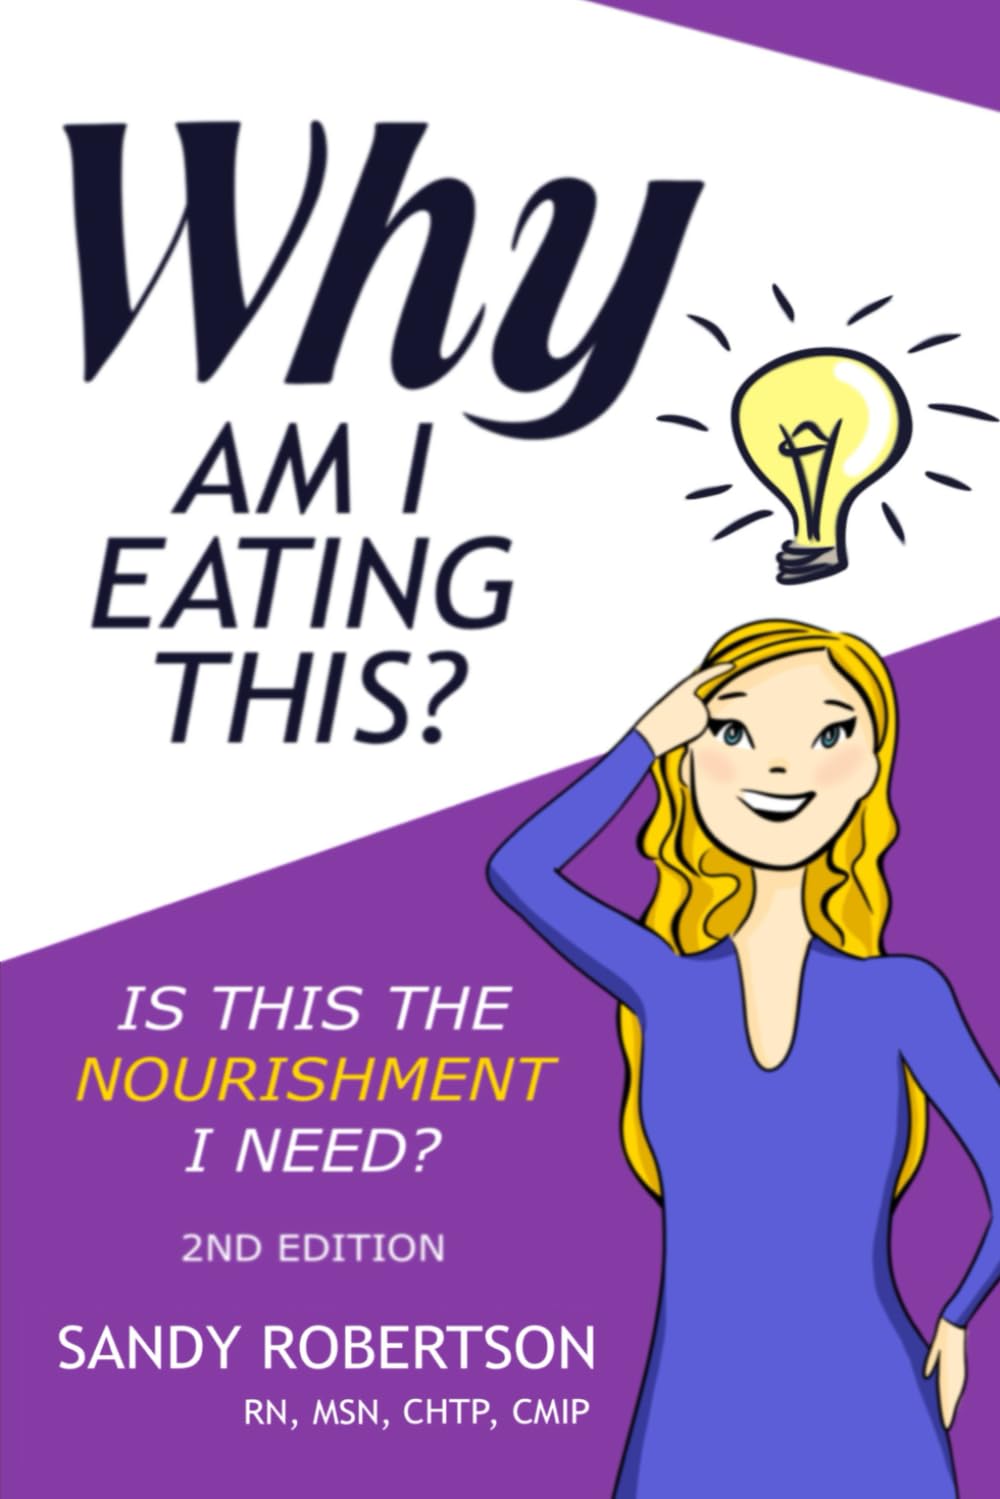 Why Am I Eating This by Sandy Robertson, book cover image. #nutritionbooks #weightmanagementbooks